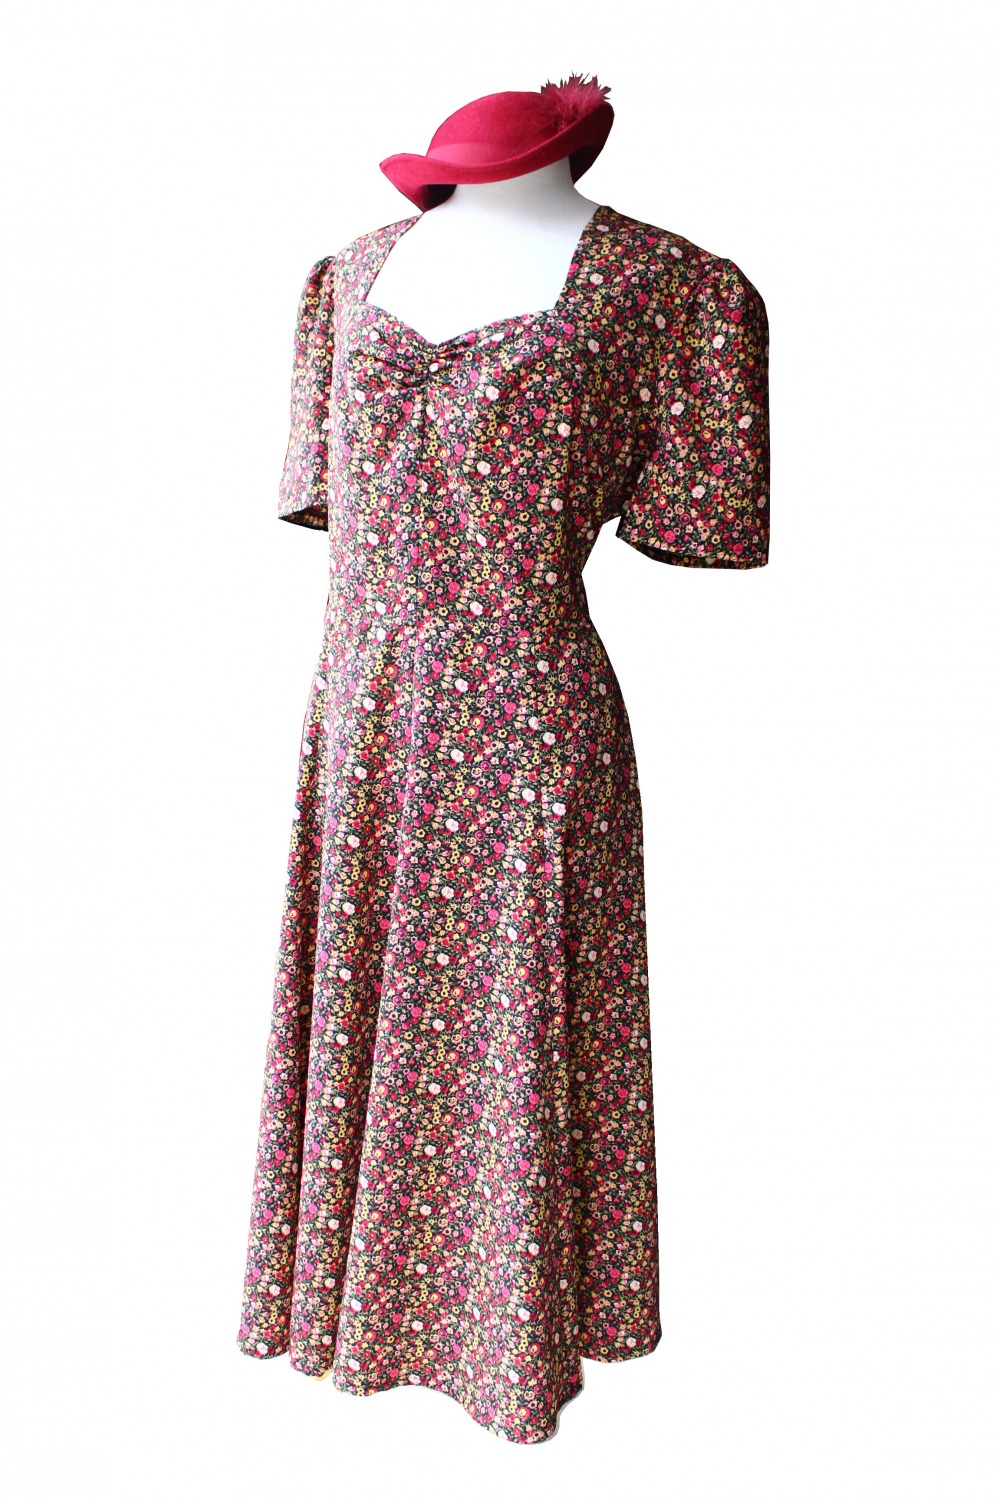 Ladies Wartime Goodwood Costume Size 18 - 20 Image